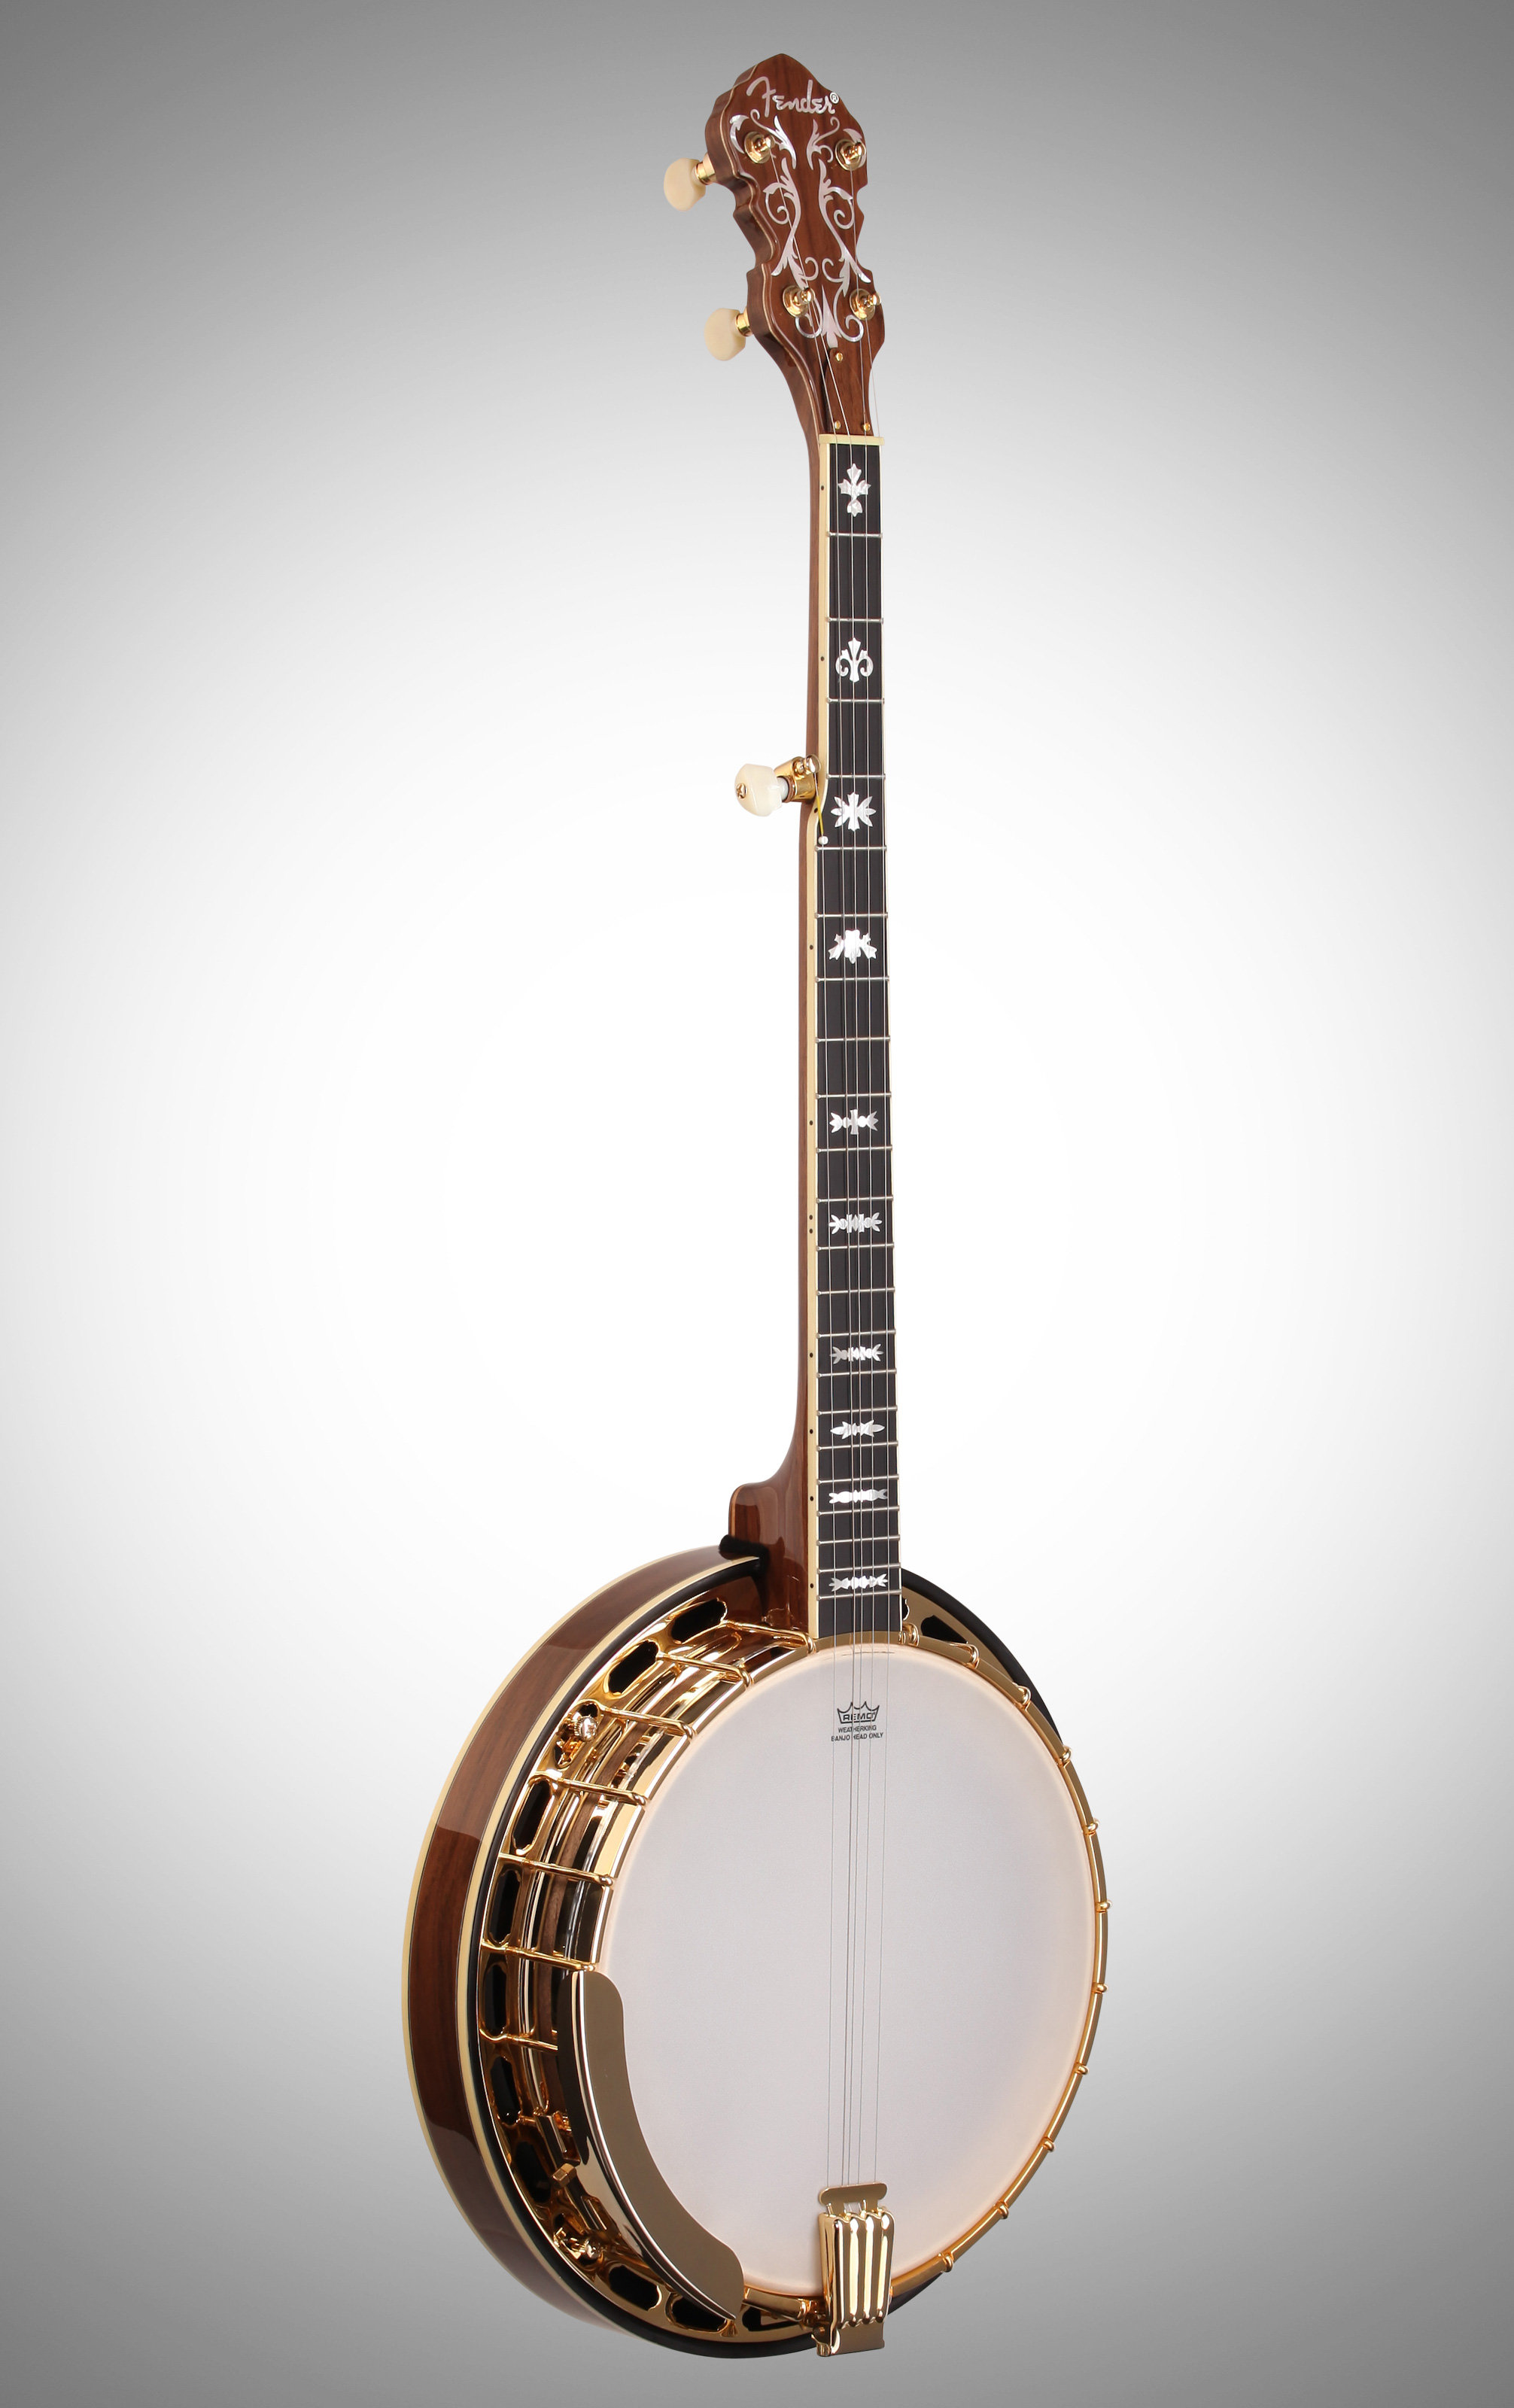 Fender FB-59 Banjo with Case at zZounds